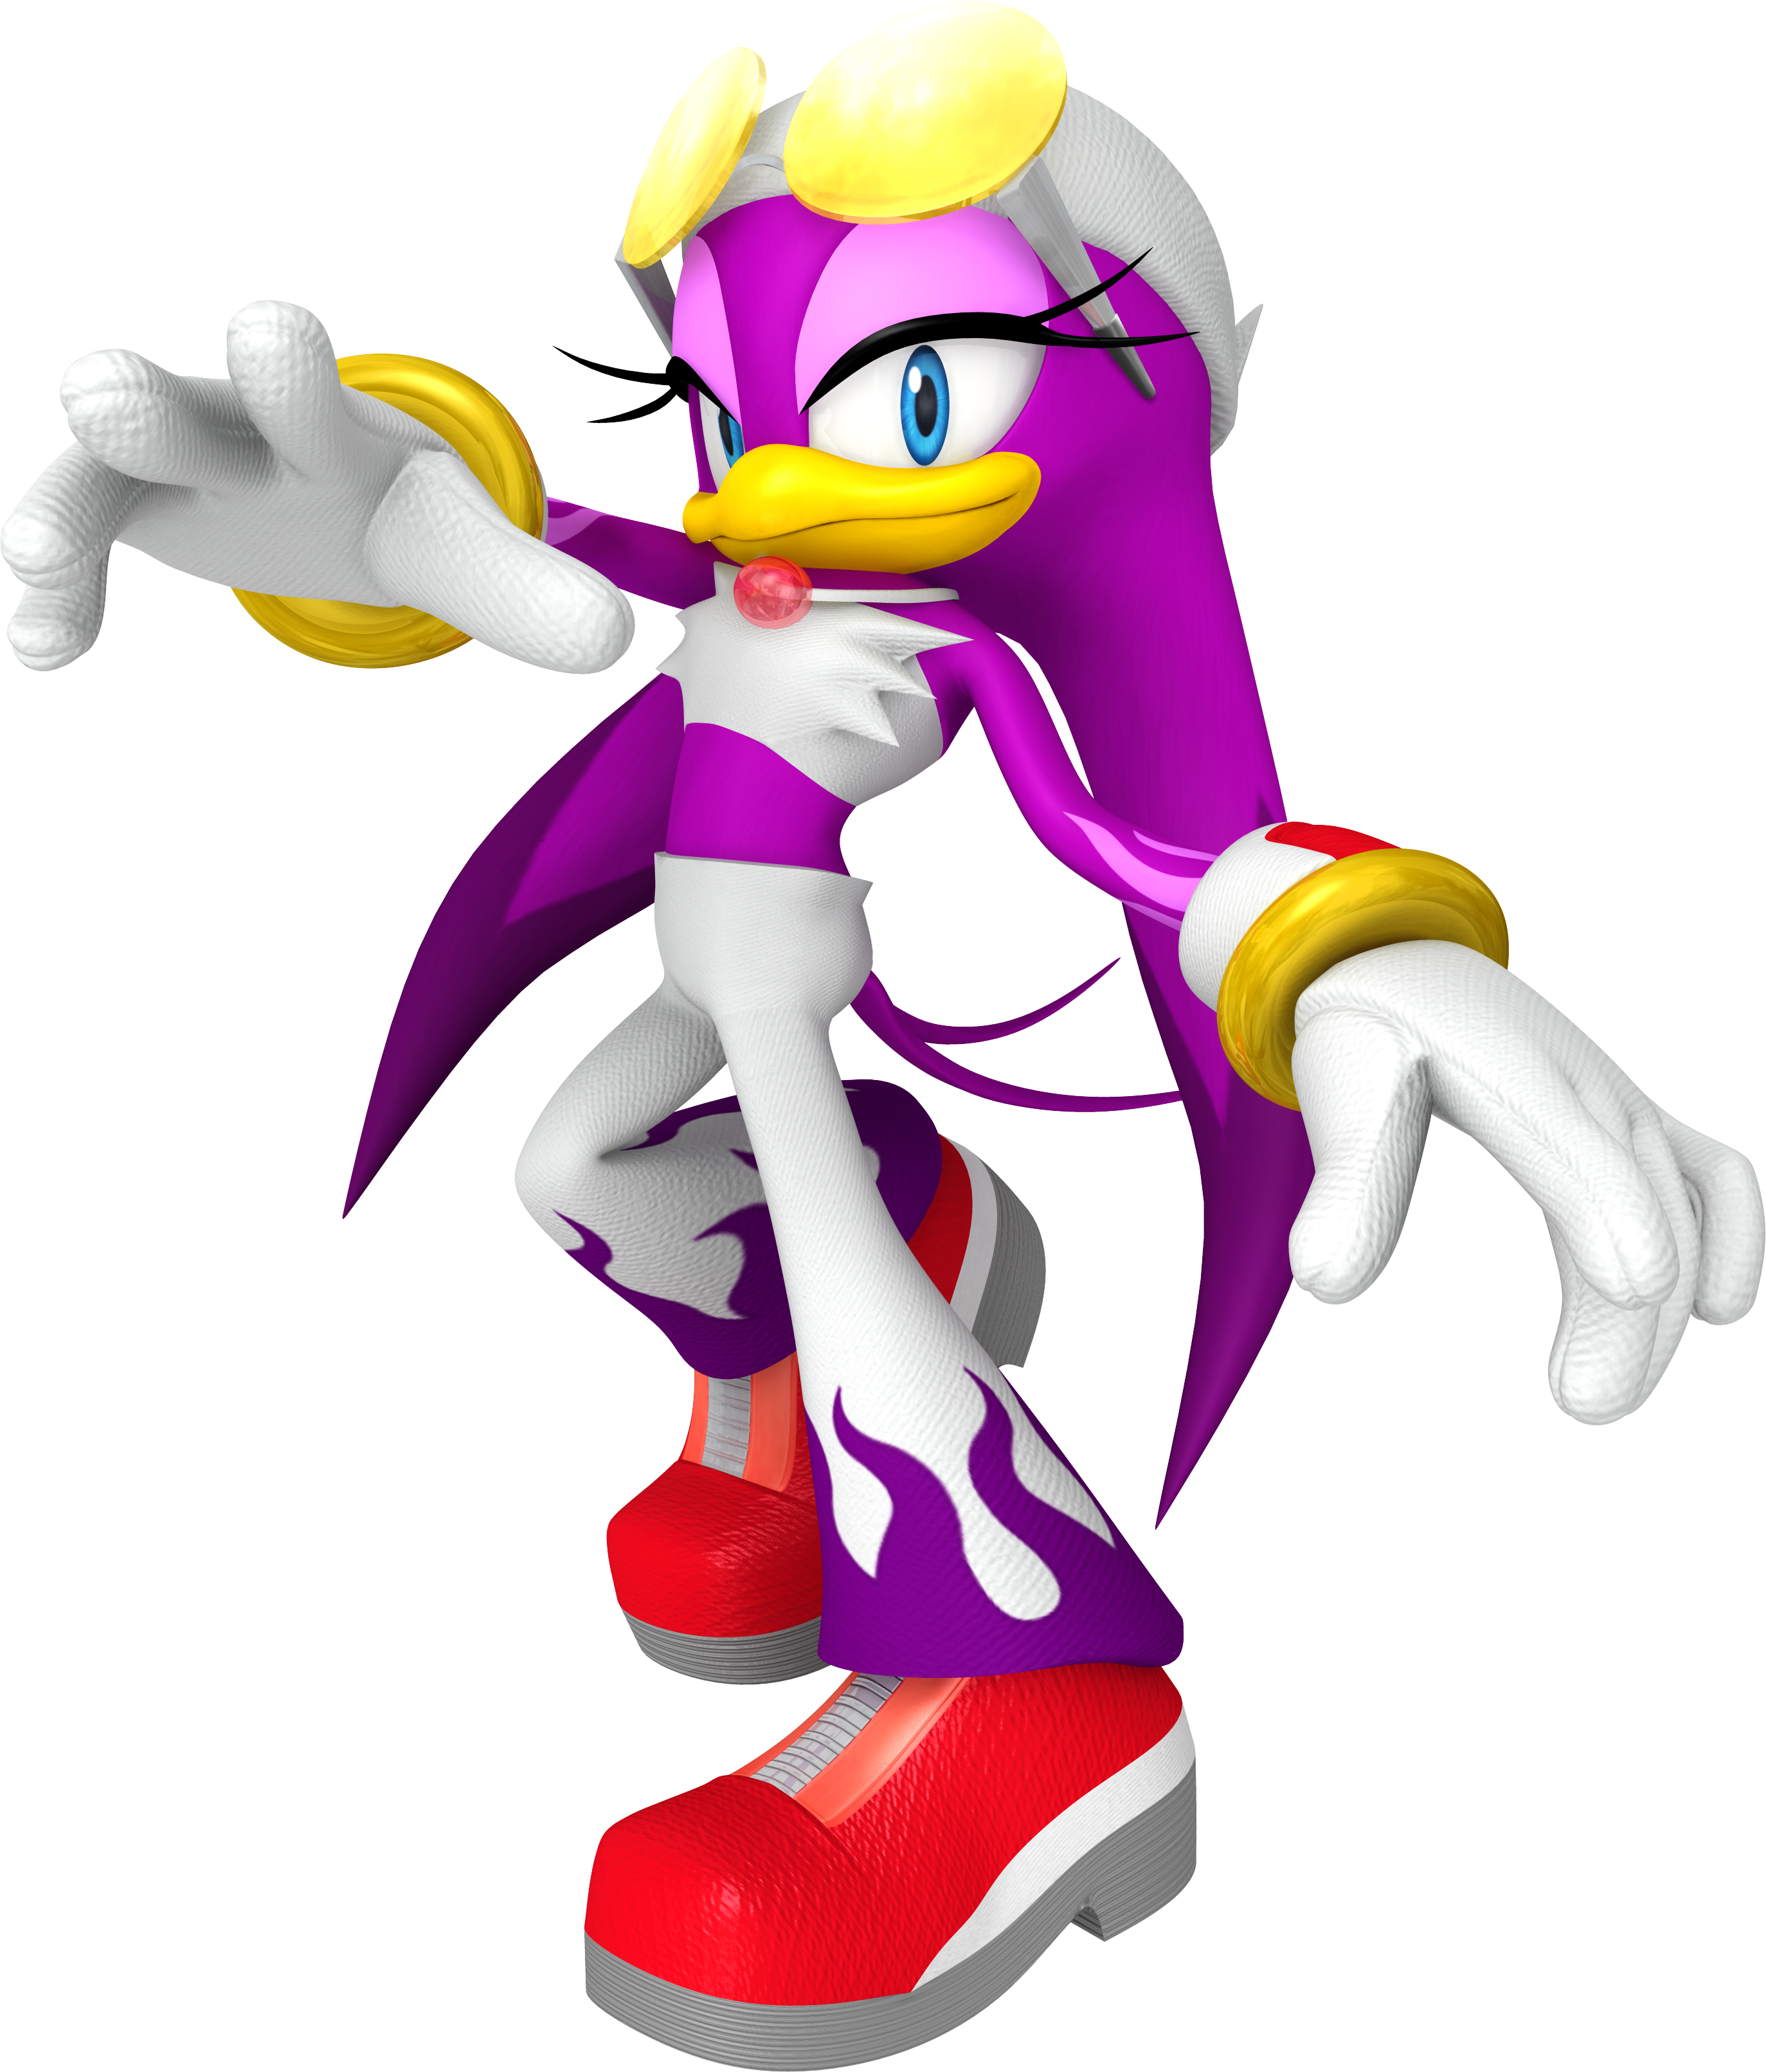 Clipart wave storm wave. The swallow sonic news